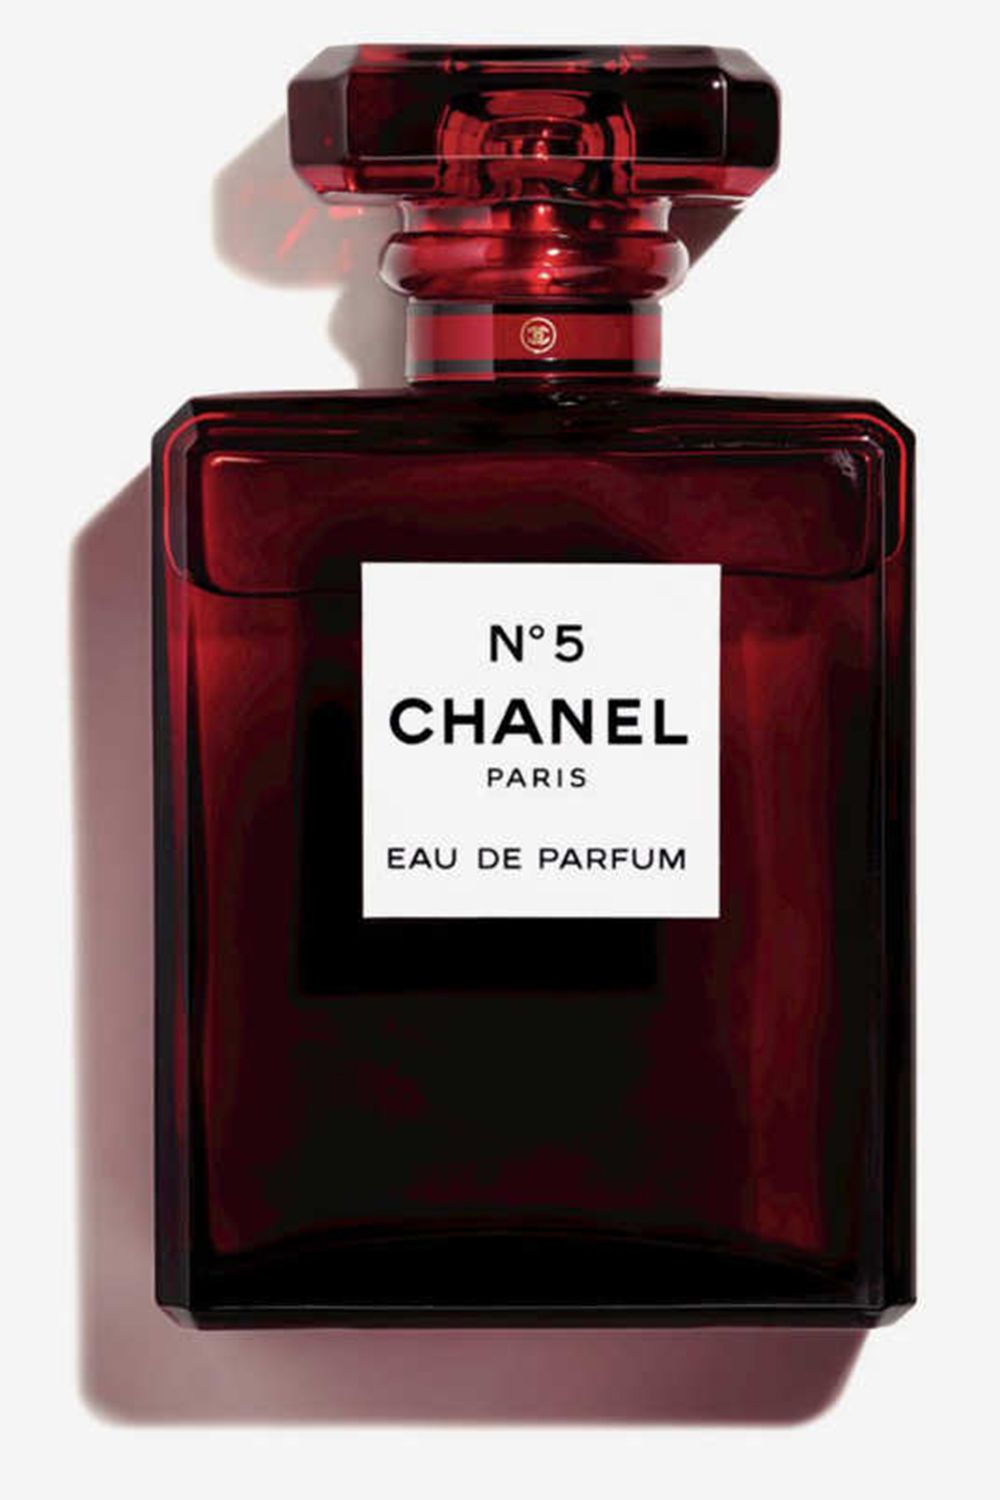 Chanel No. 5 limited-edition red bottle - Christmas